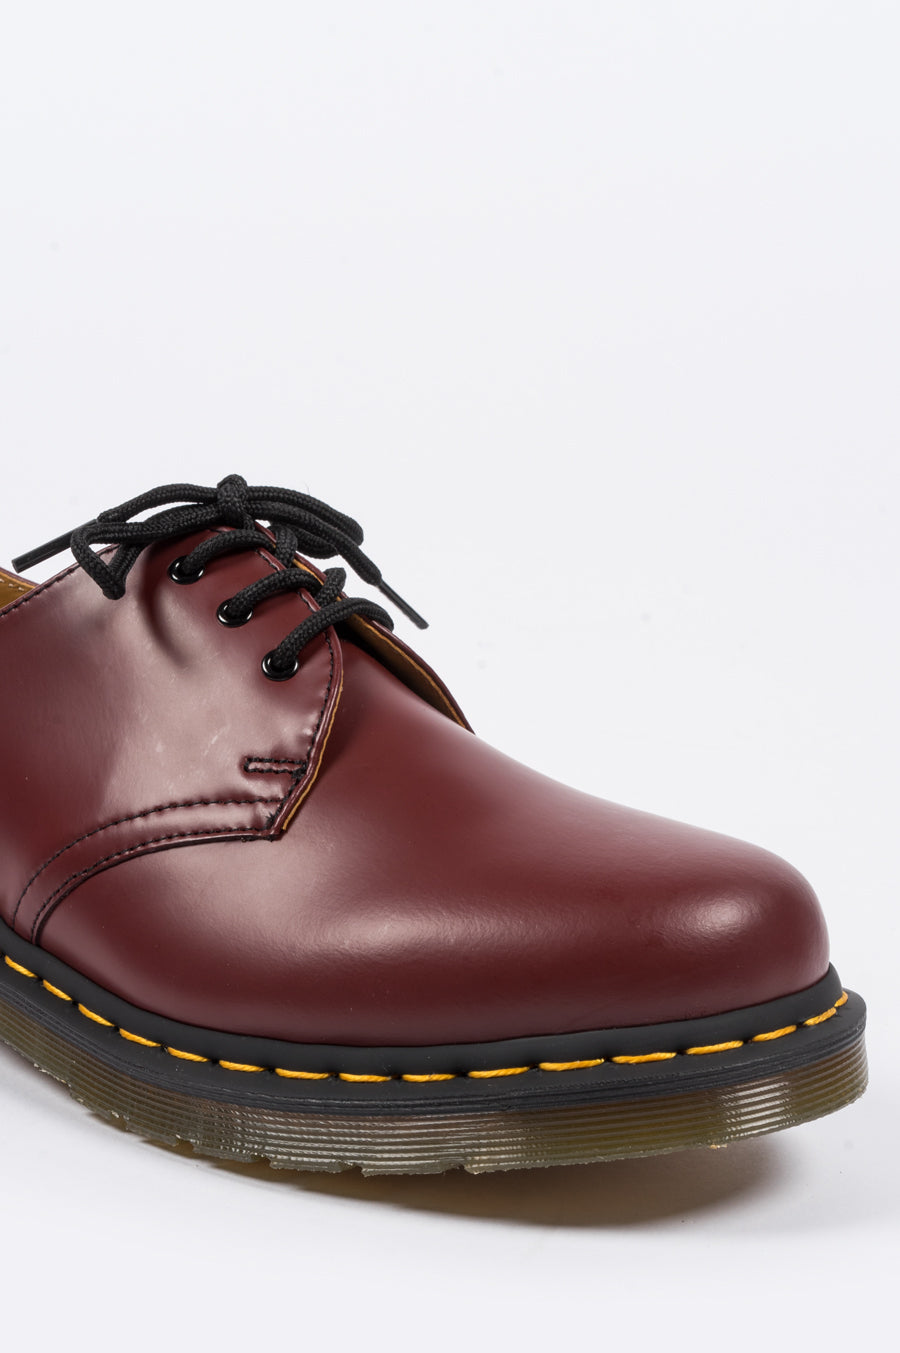 DR MARTENS 1461 SMOOTH CHERRY RED - BLENDS